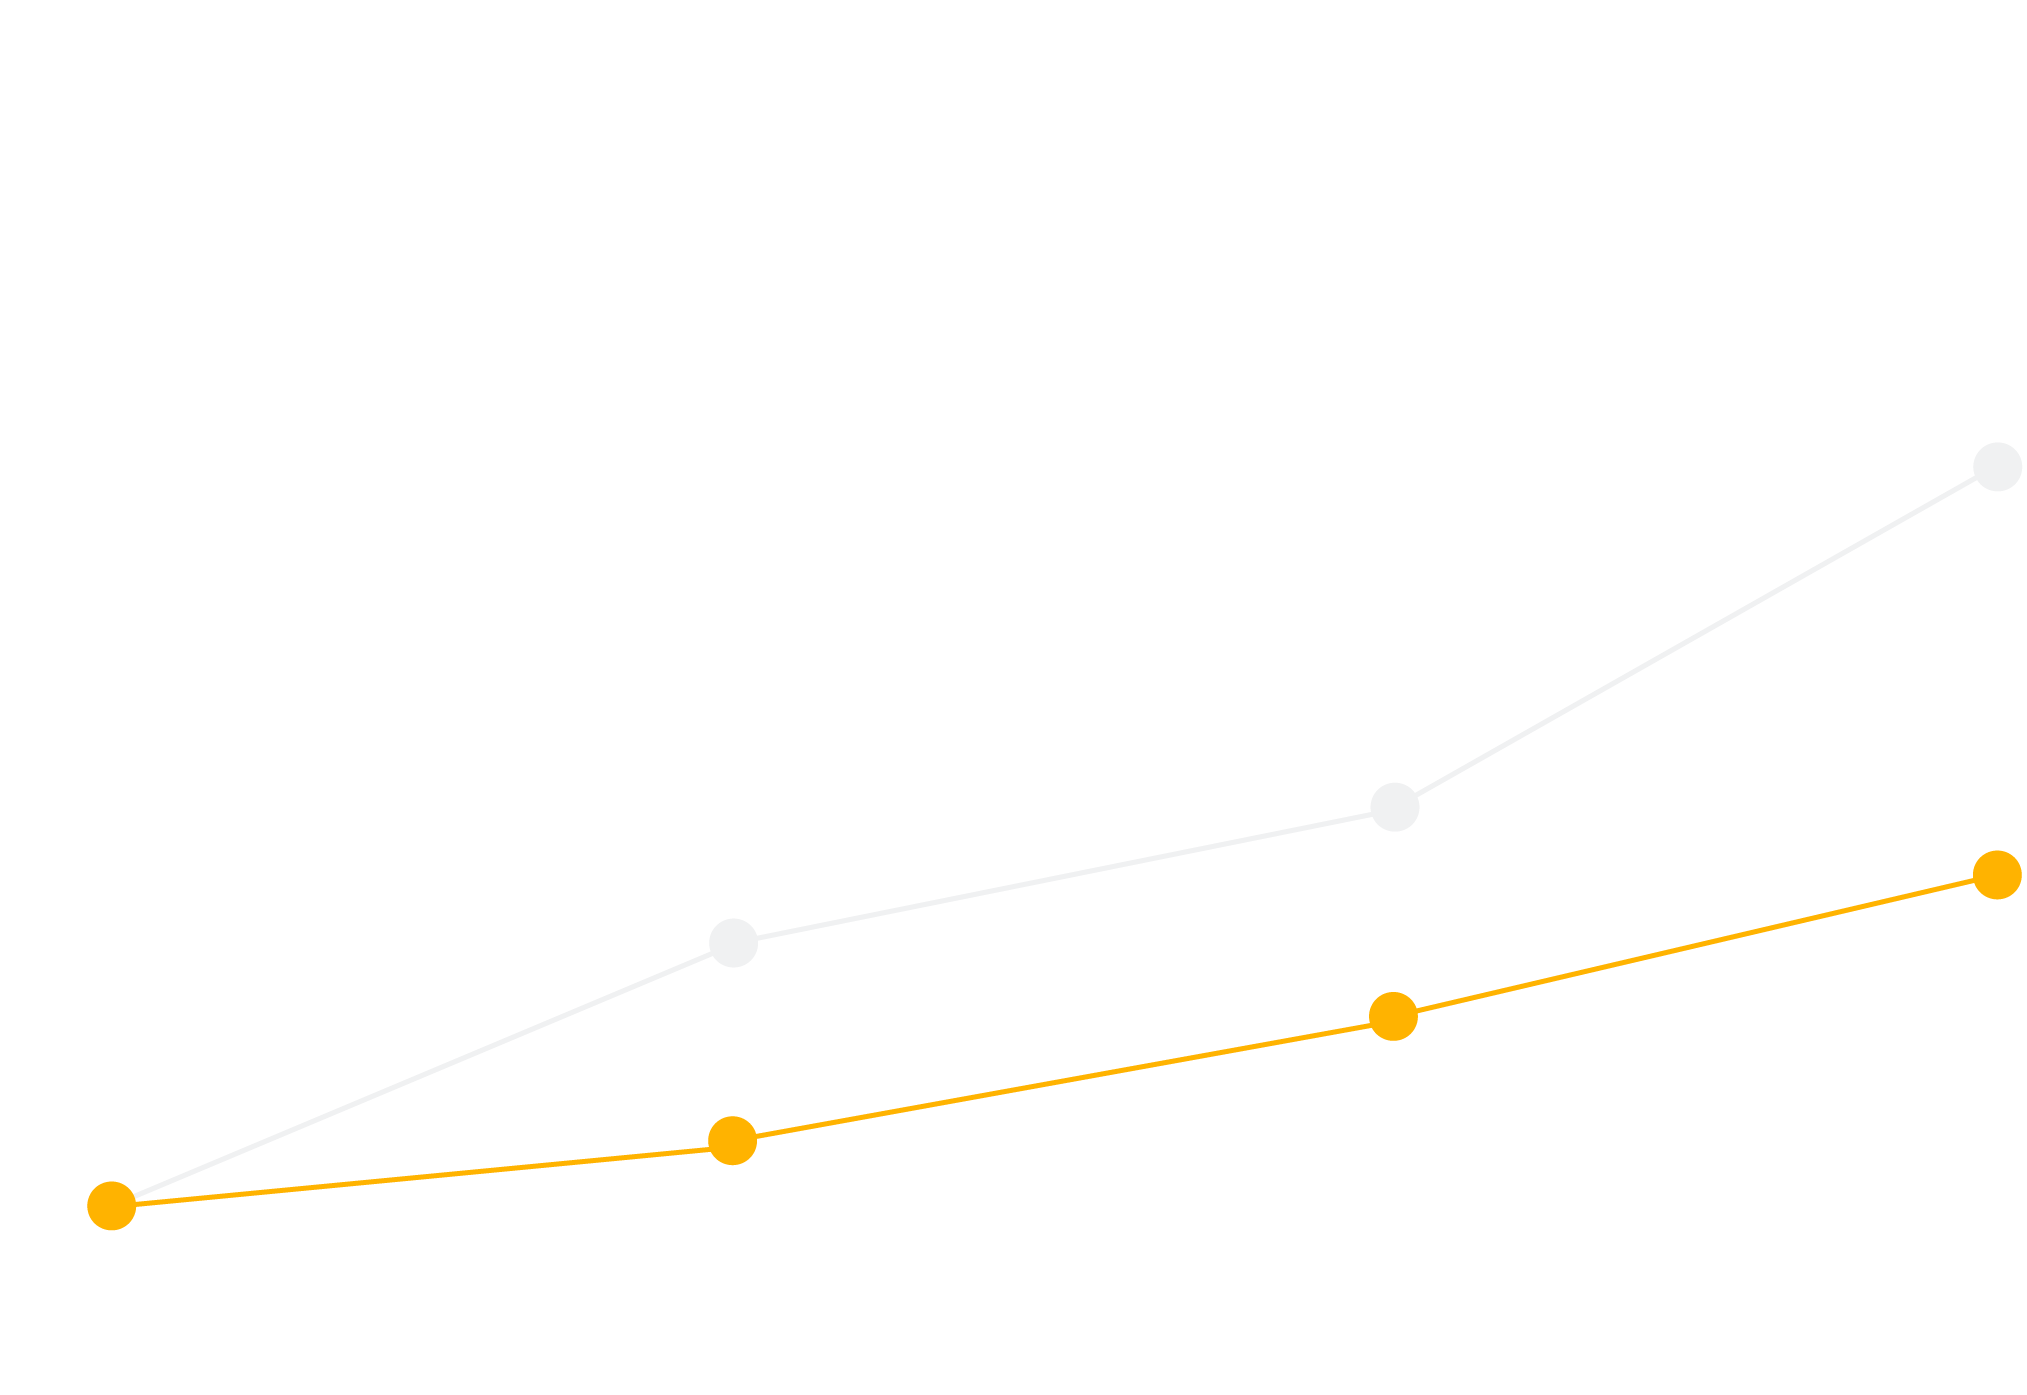 Cost of Ownership with and without a preventative maintenance plan